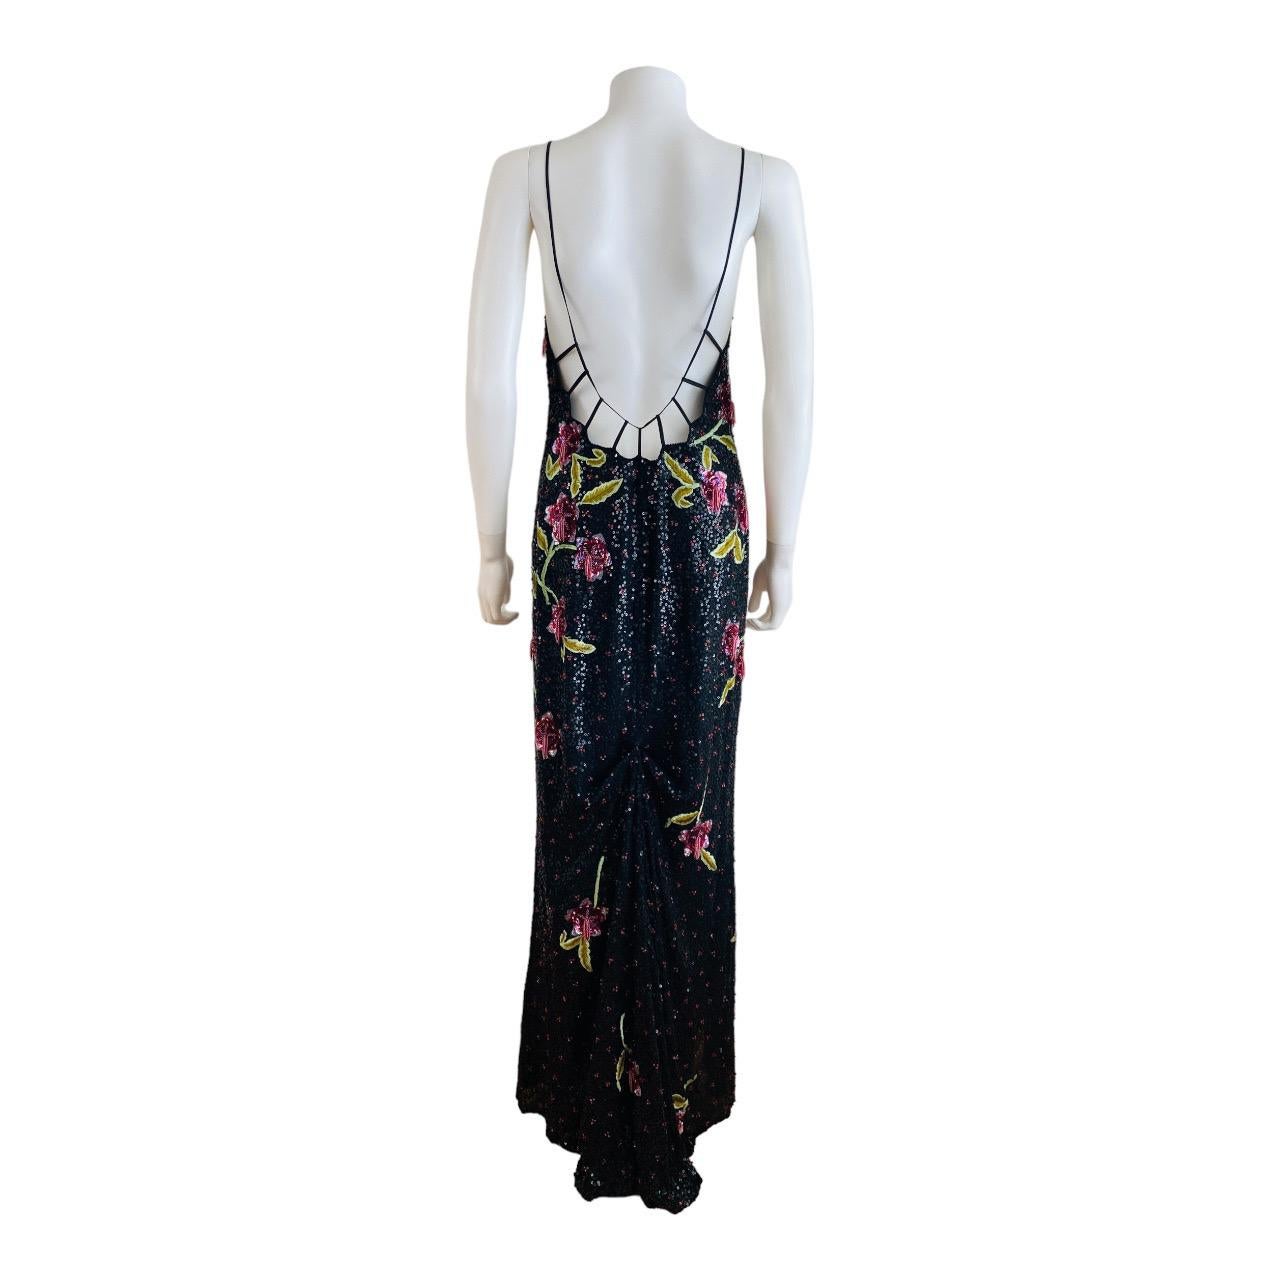 Vintage 2002 Escada Hand Beaded Sequin Floral Maxi Dress Gown Black Pink Flowers For Sale 5